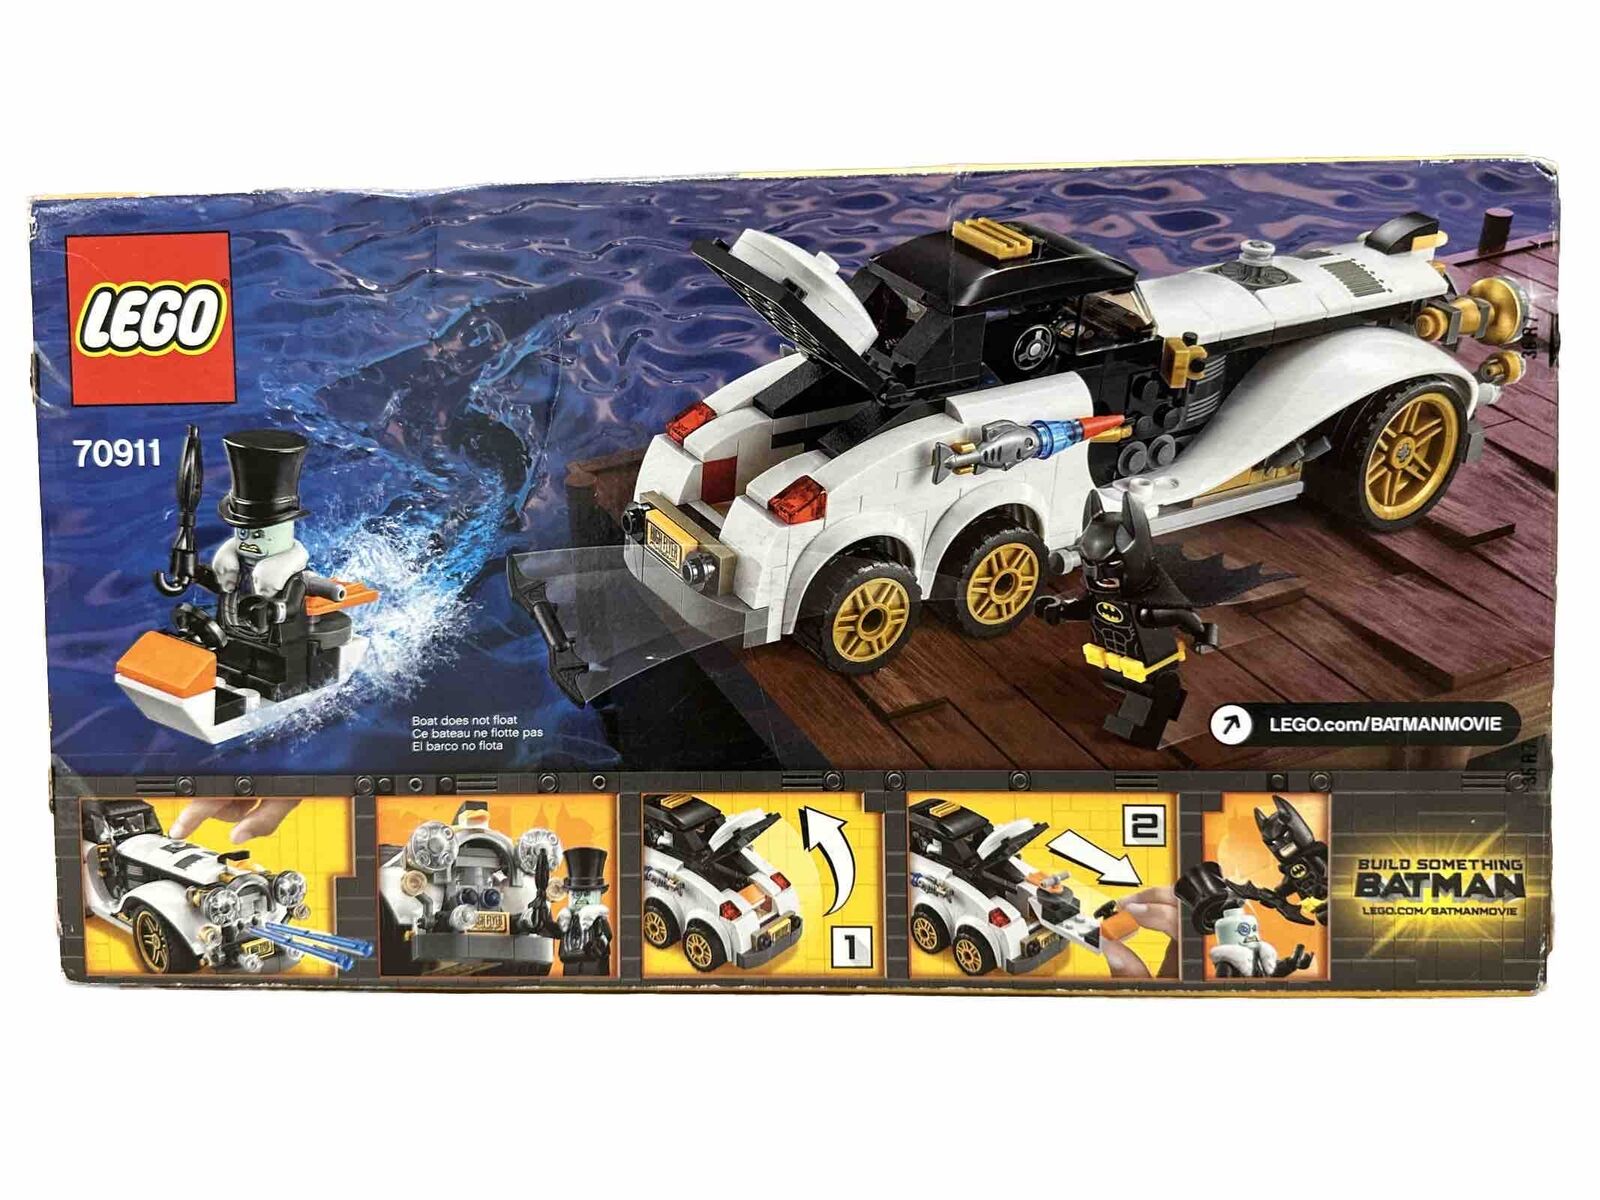 LEGO 70911 The Batman Movie The Penguin Arctic Roller RETIRED FACTORY SEALED